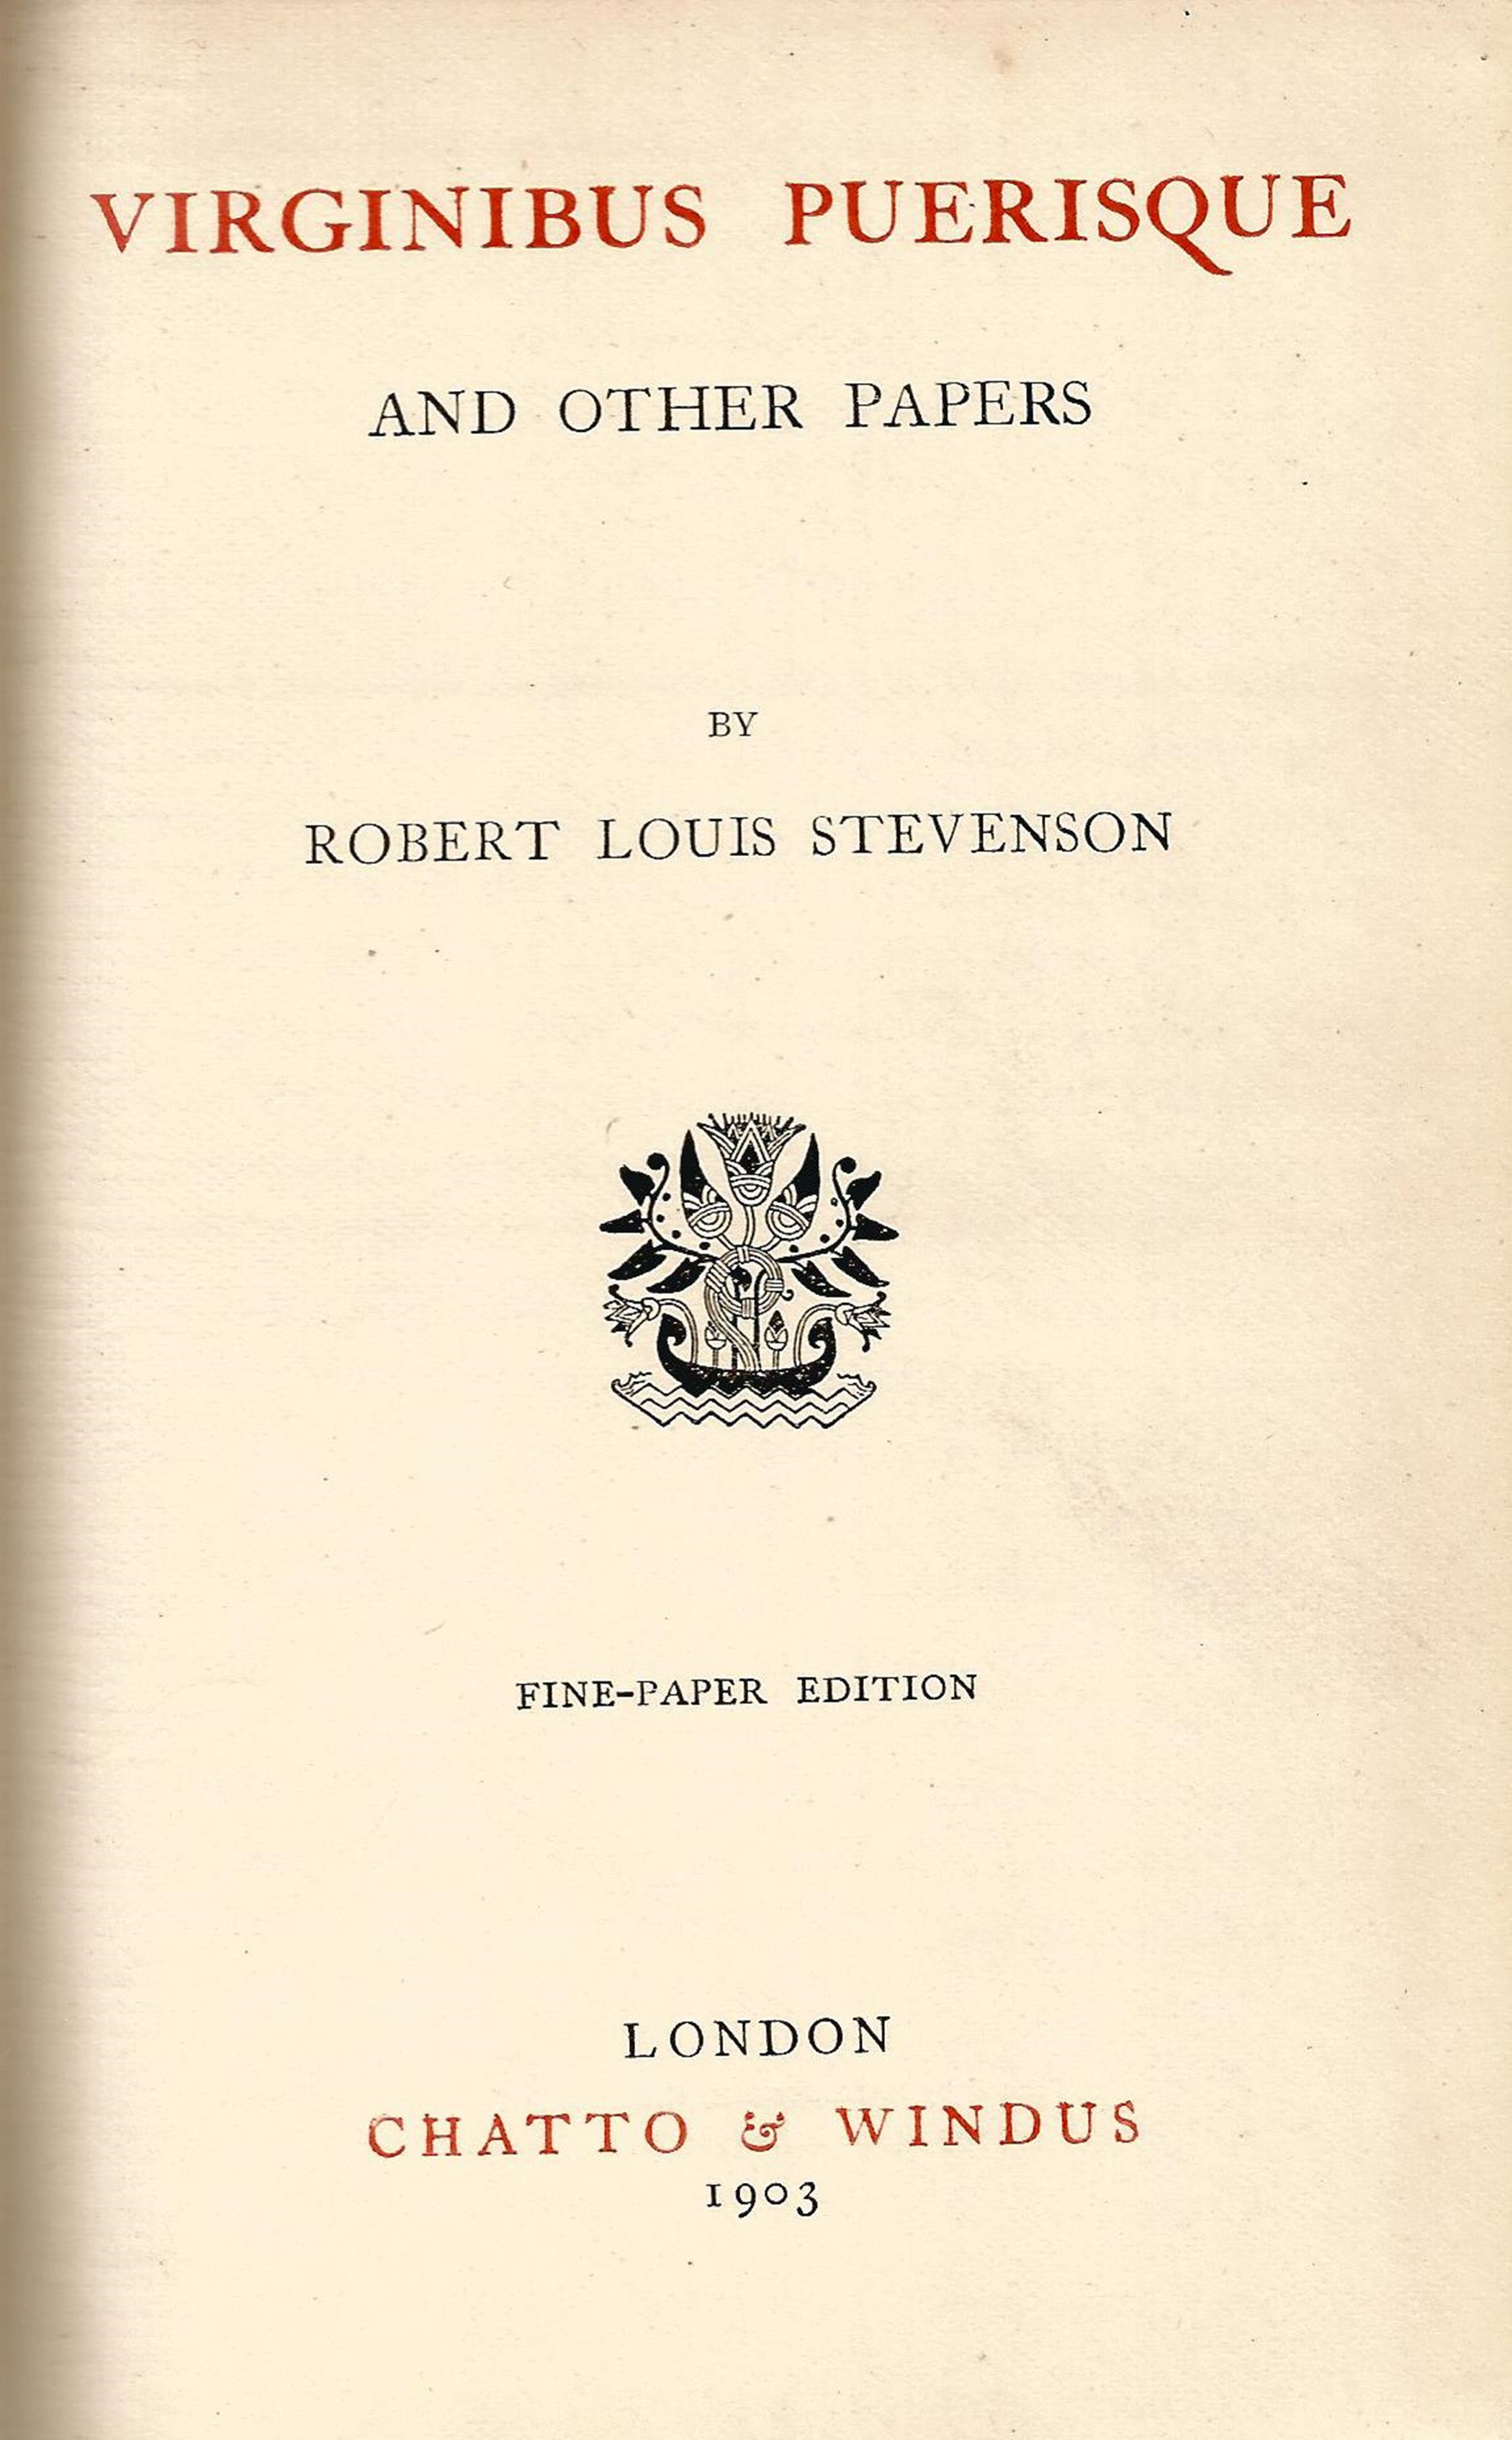 Virginibus Puerisque and Other Papers by Robert Louis Stevenson 1903 Hardback Book published by - Image 2 of 2